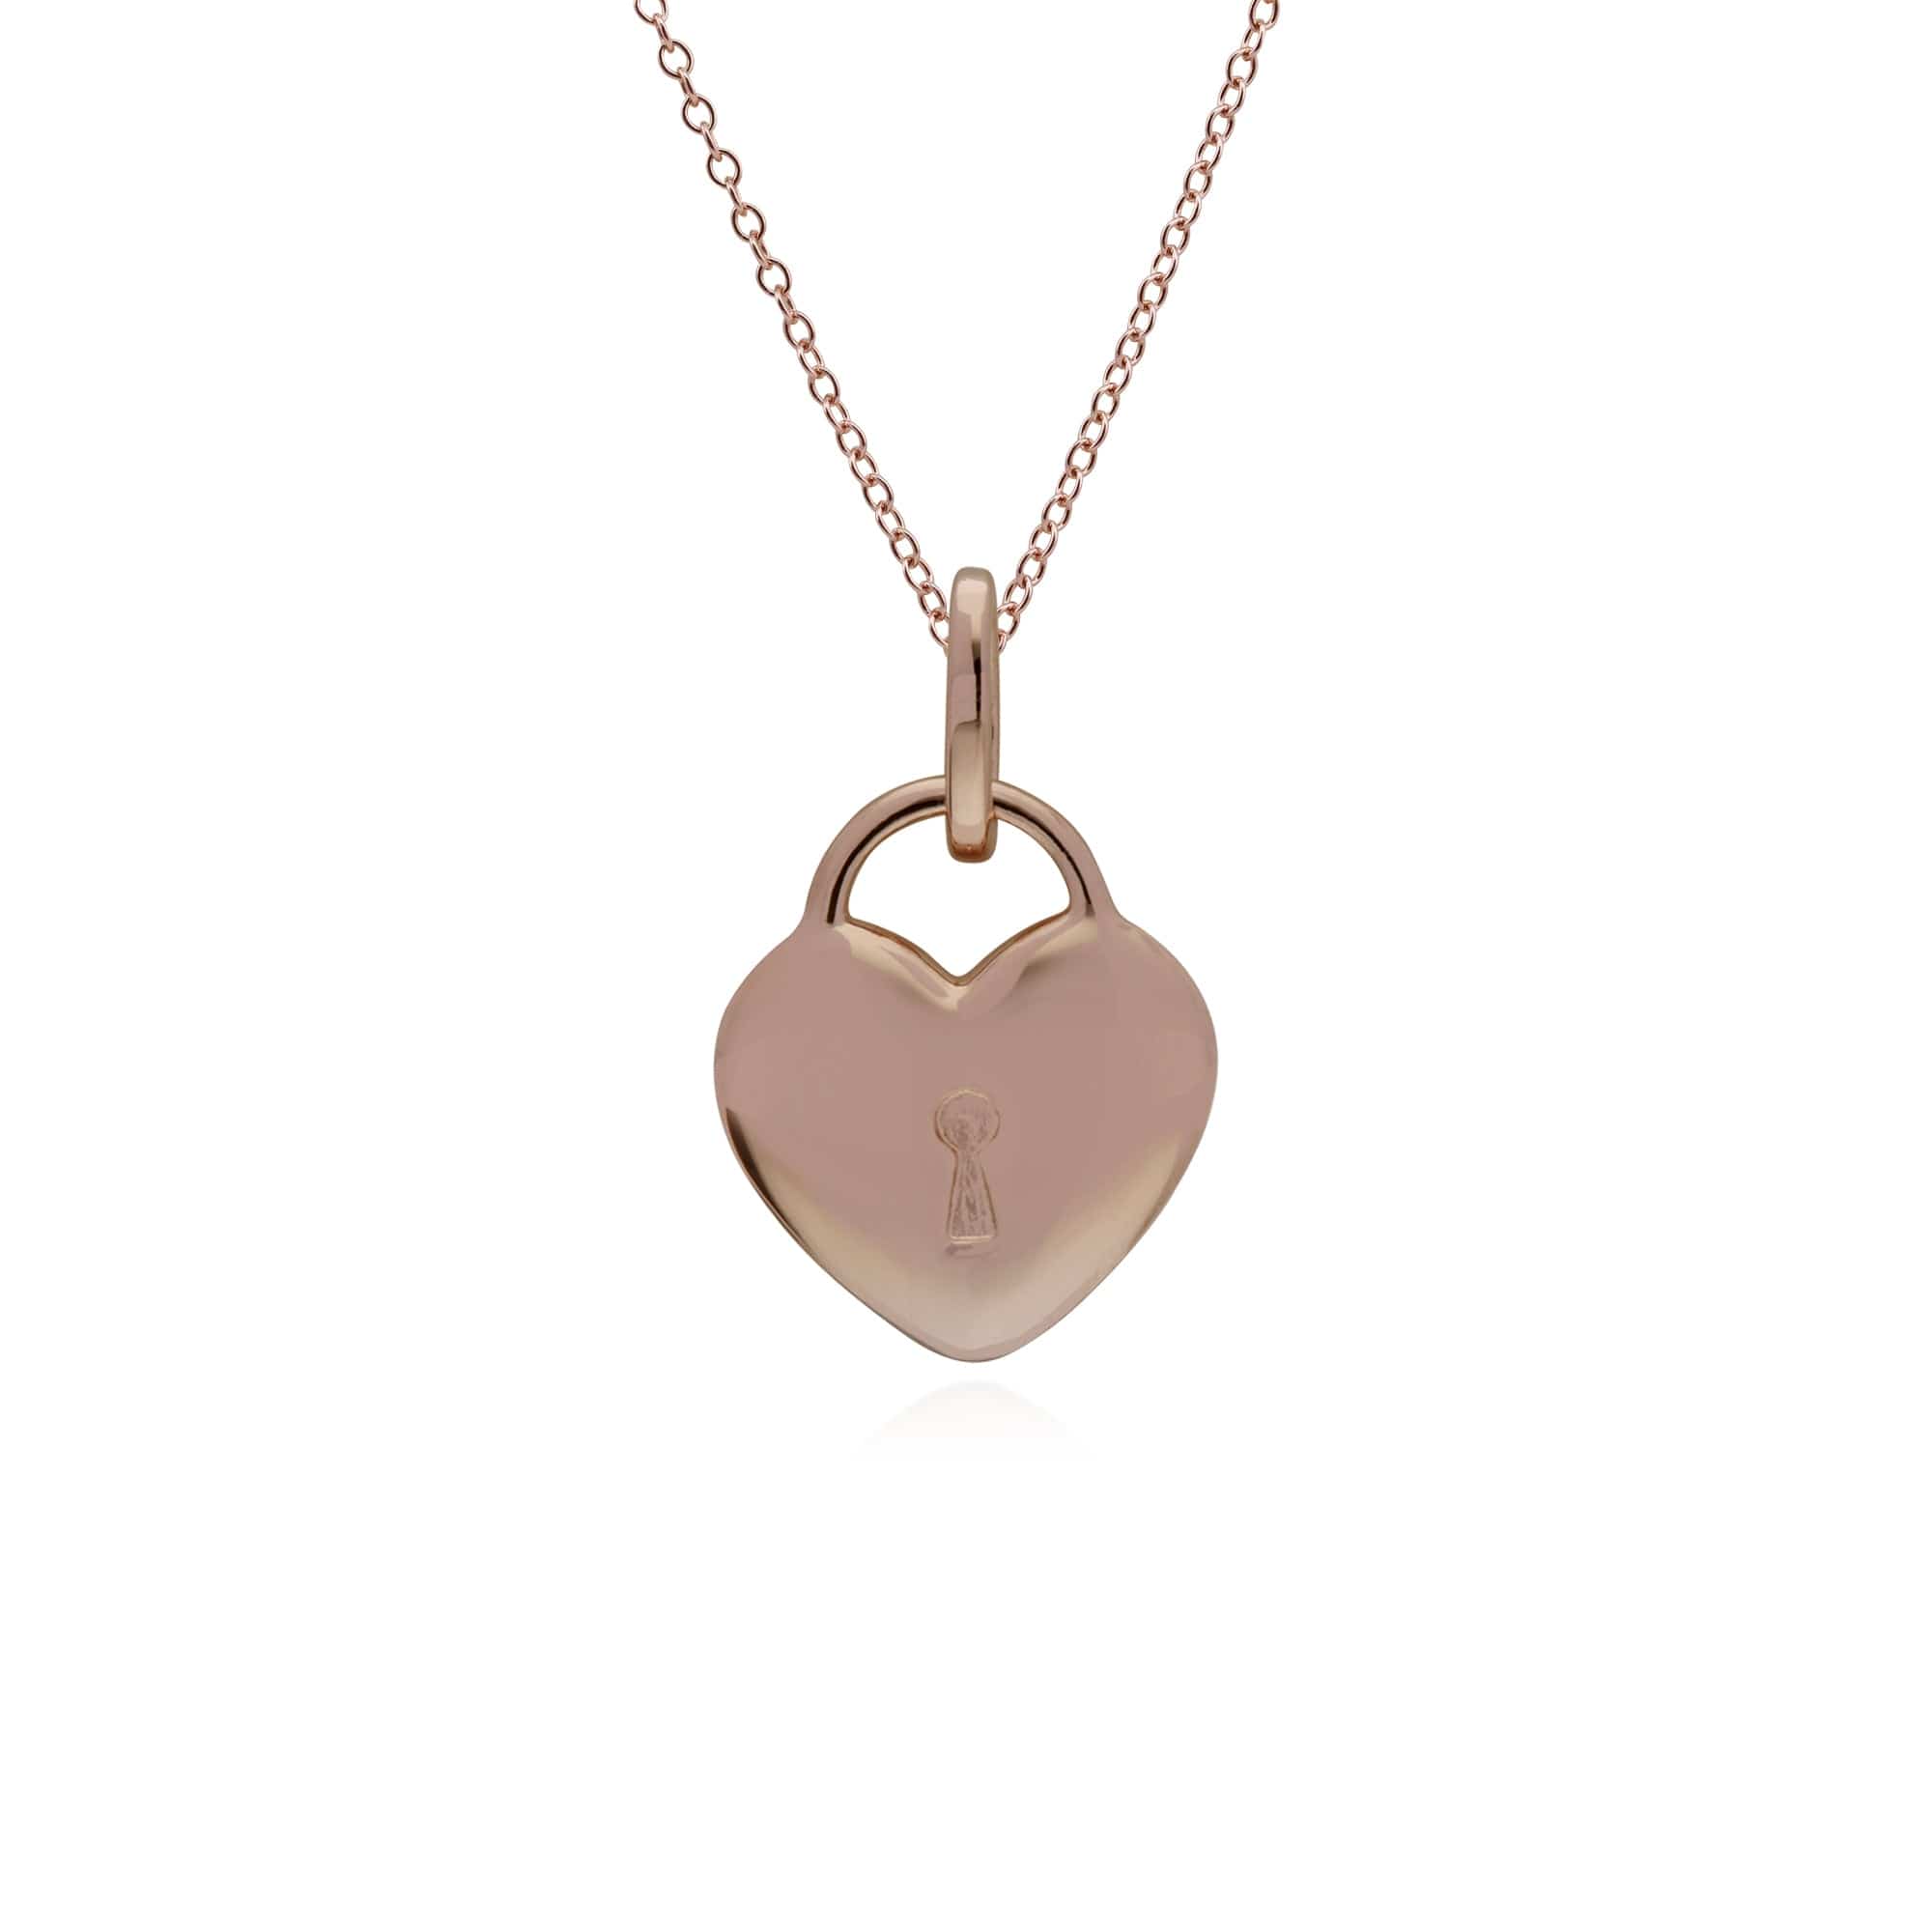 270P026307925-270P026901925 Classic Heart Lock Pendant & Peridot Key Charm in Rose Gold Plated 925 Sterling Silver 3